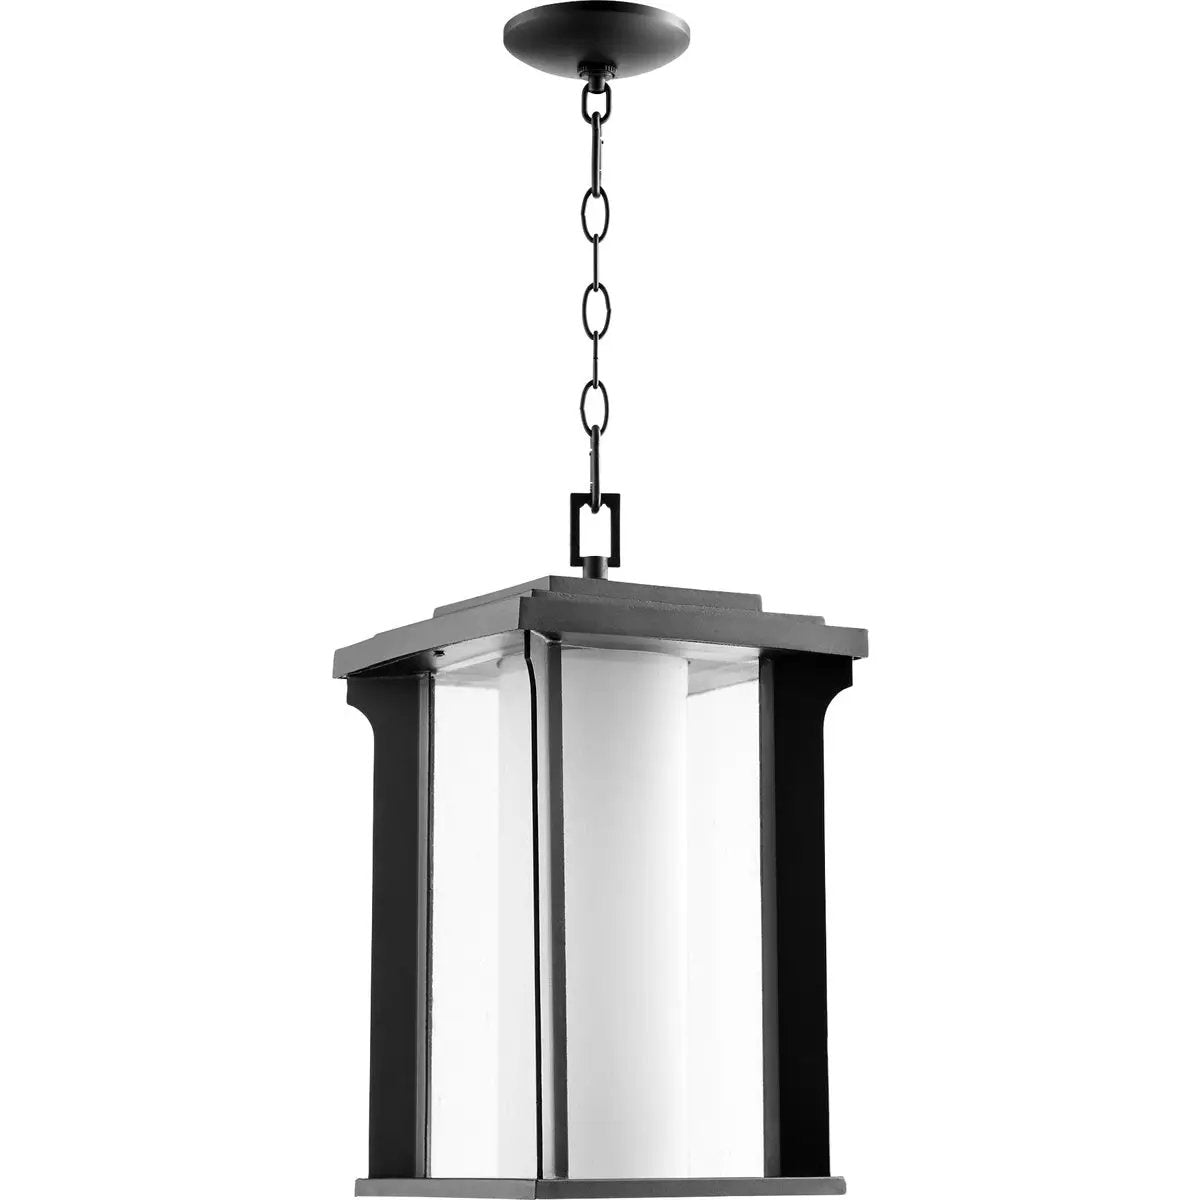 Transitional Outdoor Hanging Light with molded details and boxed design, crafted from metal with a noir finish. Features a satin opal glass cylinder diffuser for a nice ambient glow. UL Listed for wet locations. Dimensions: 10"W x 16"H. 2-year warranty.